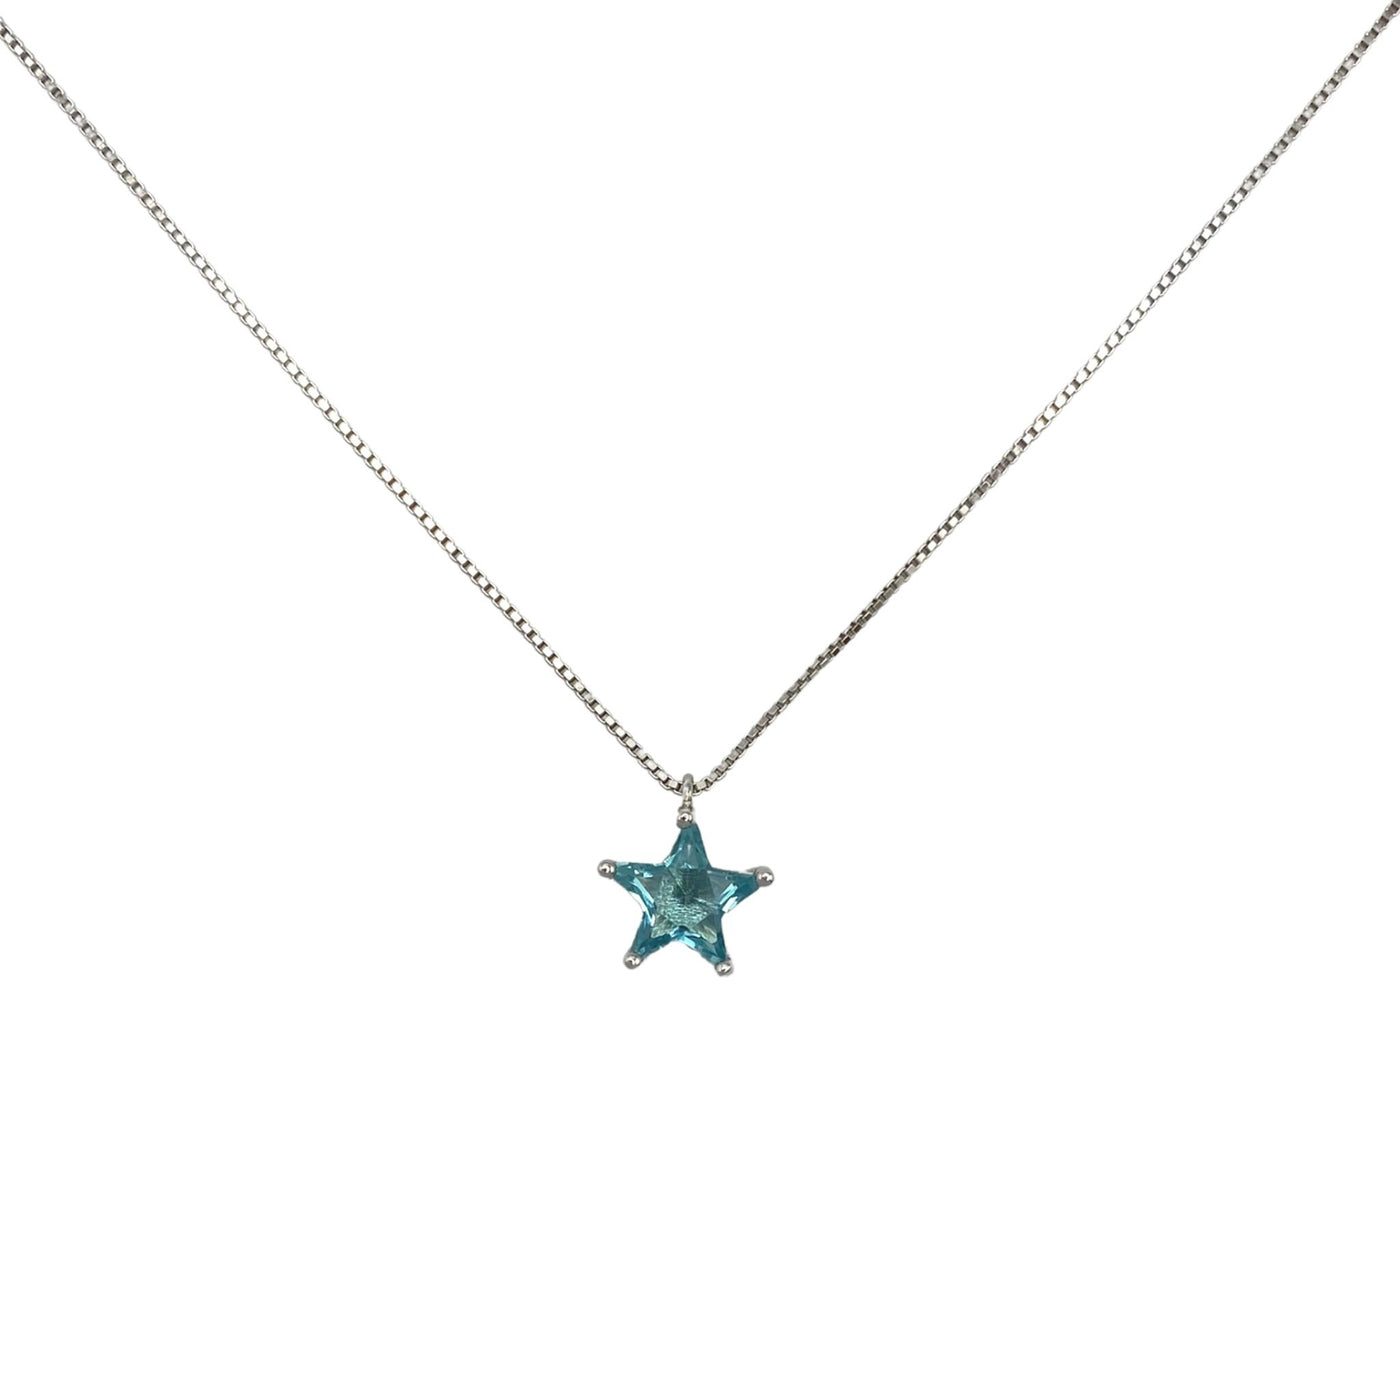 Silver necklace with star charm - 7 mm - rhodium